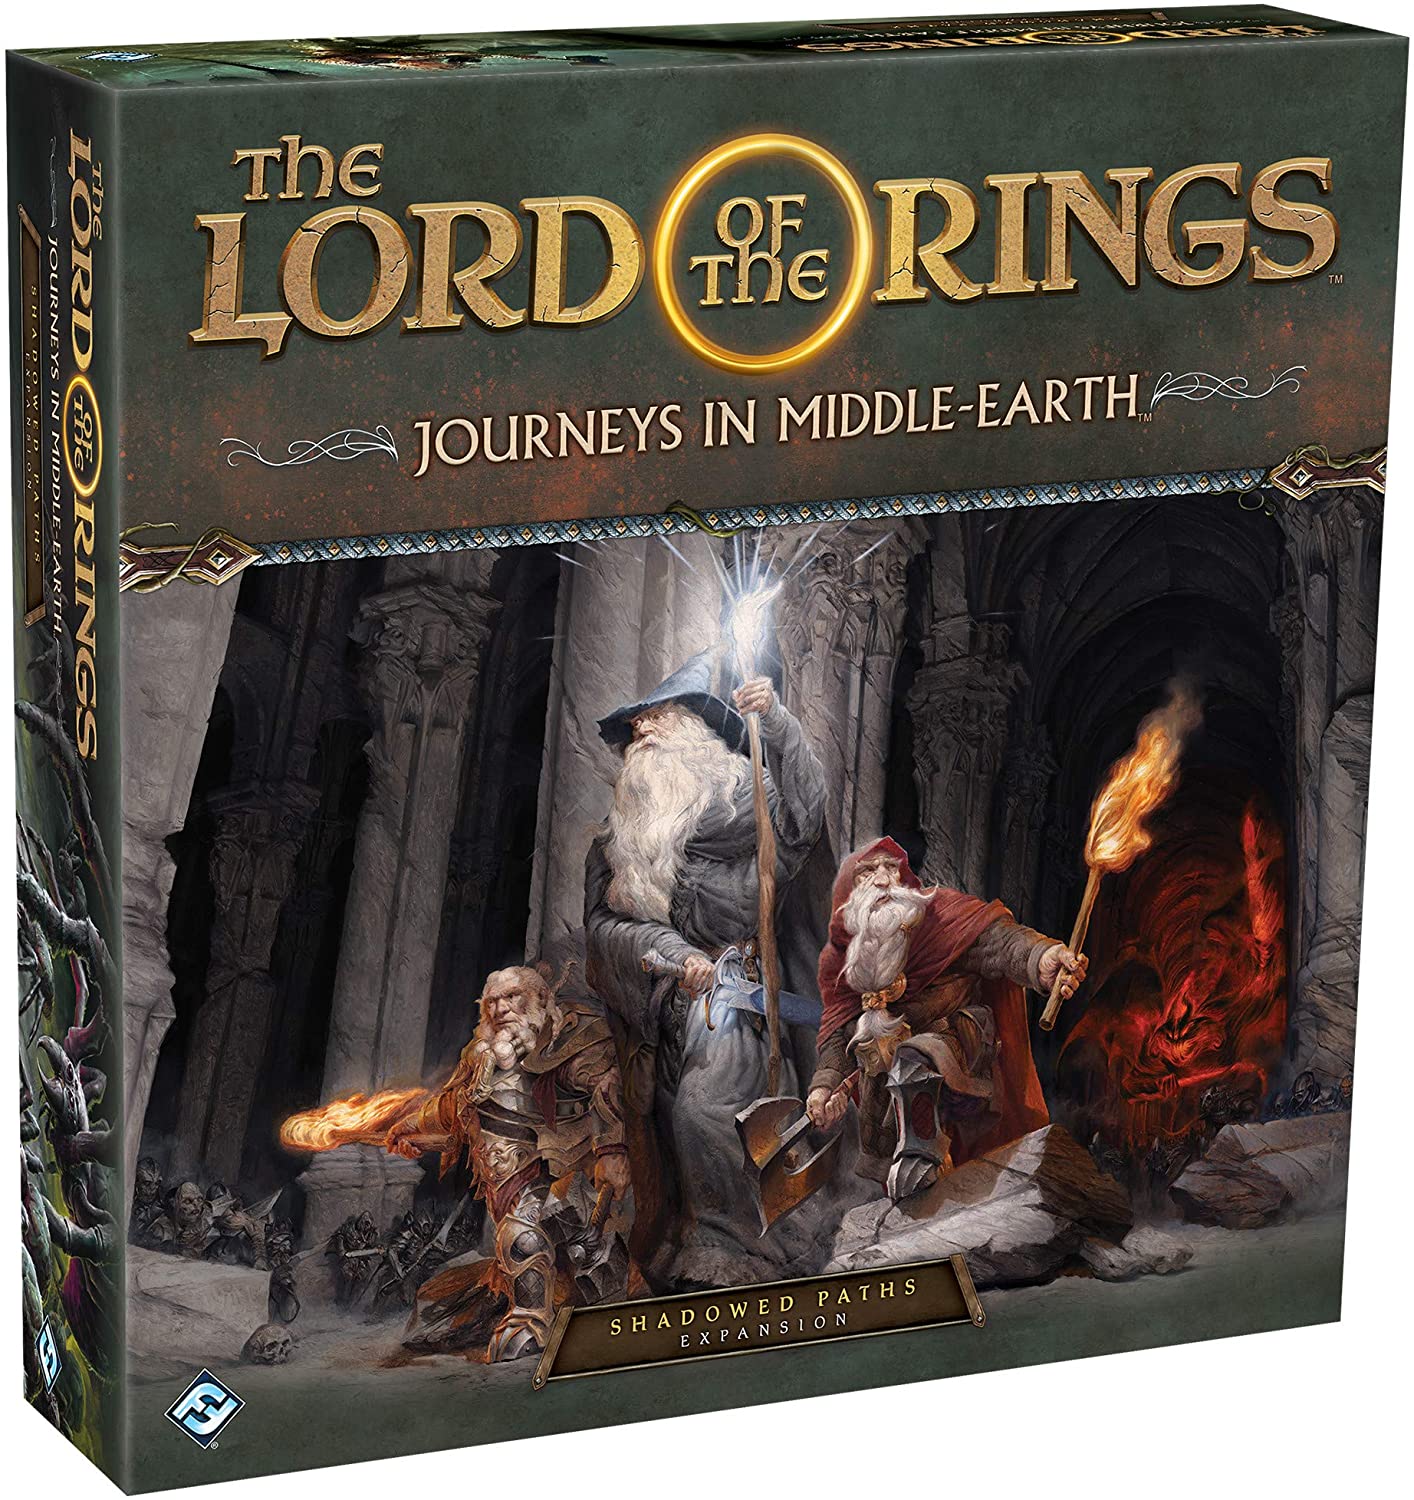 The Lord of the Rings: Journeys in Middle-Earth: Shadowed Paths